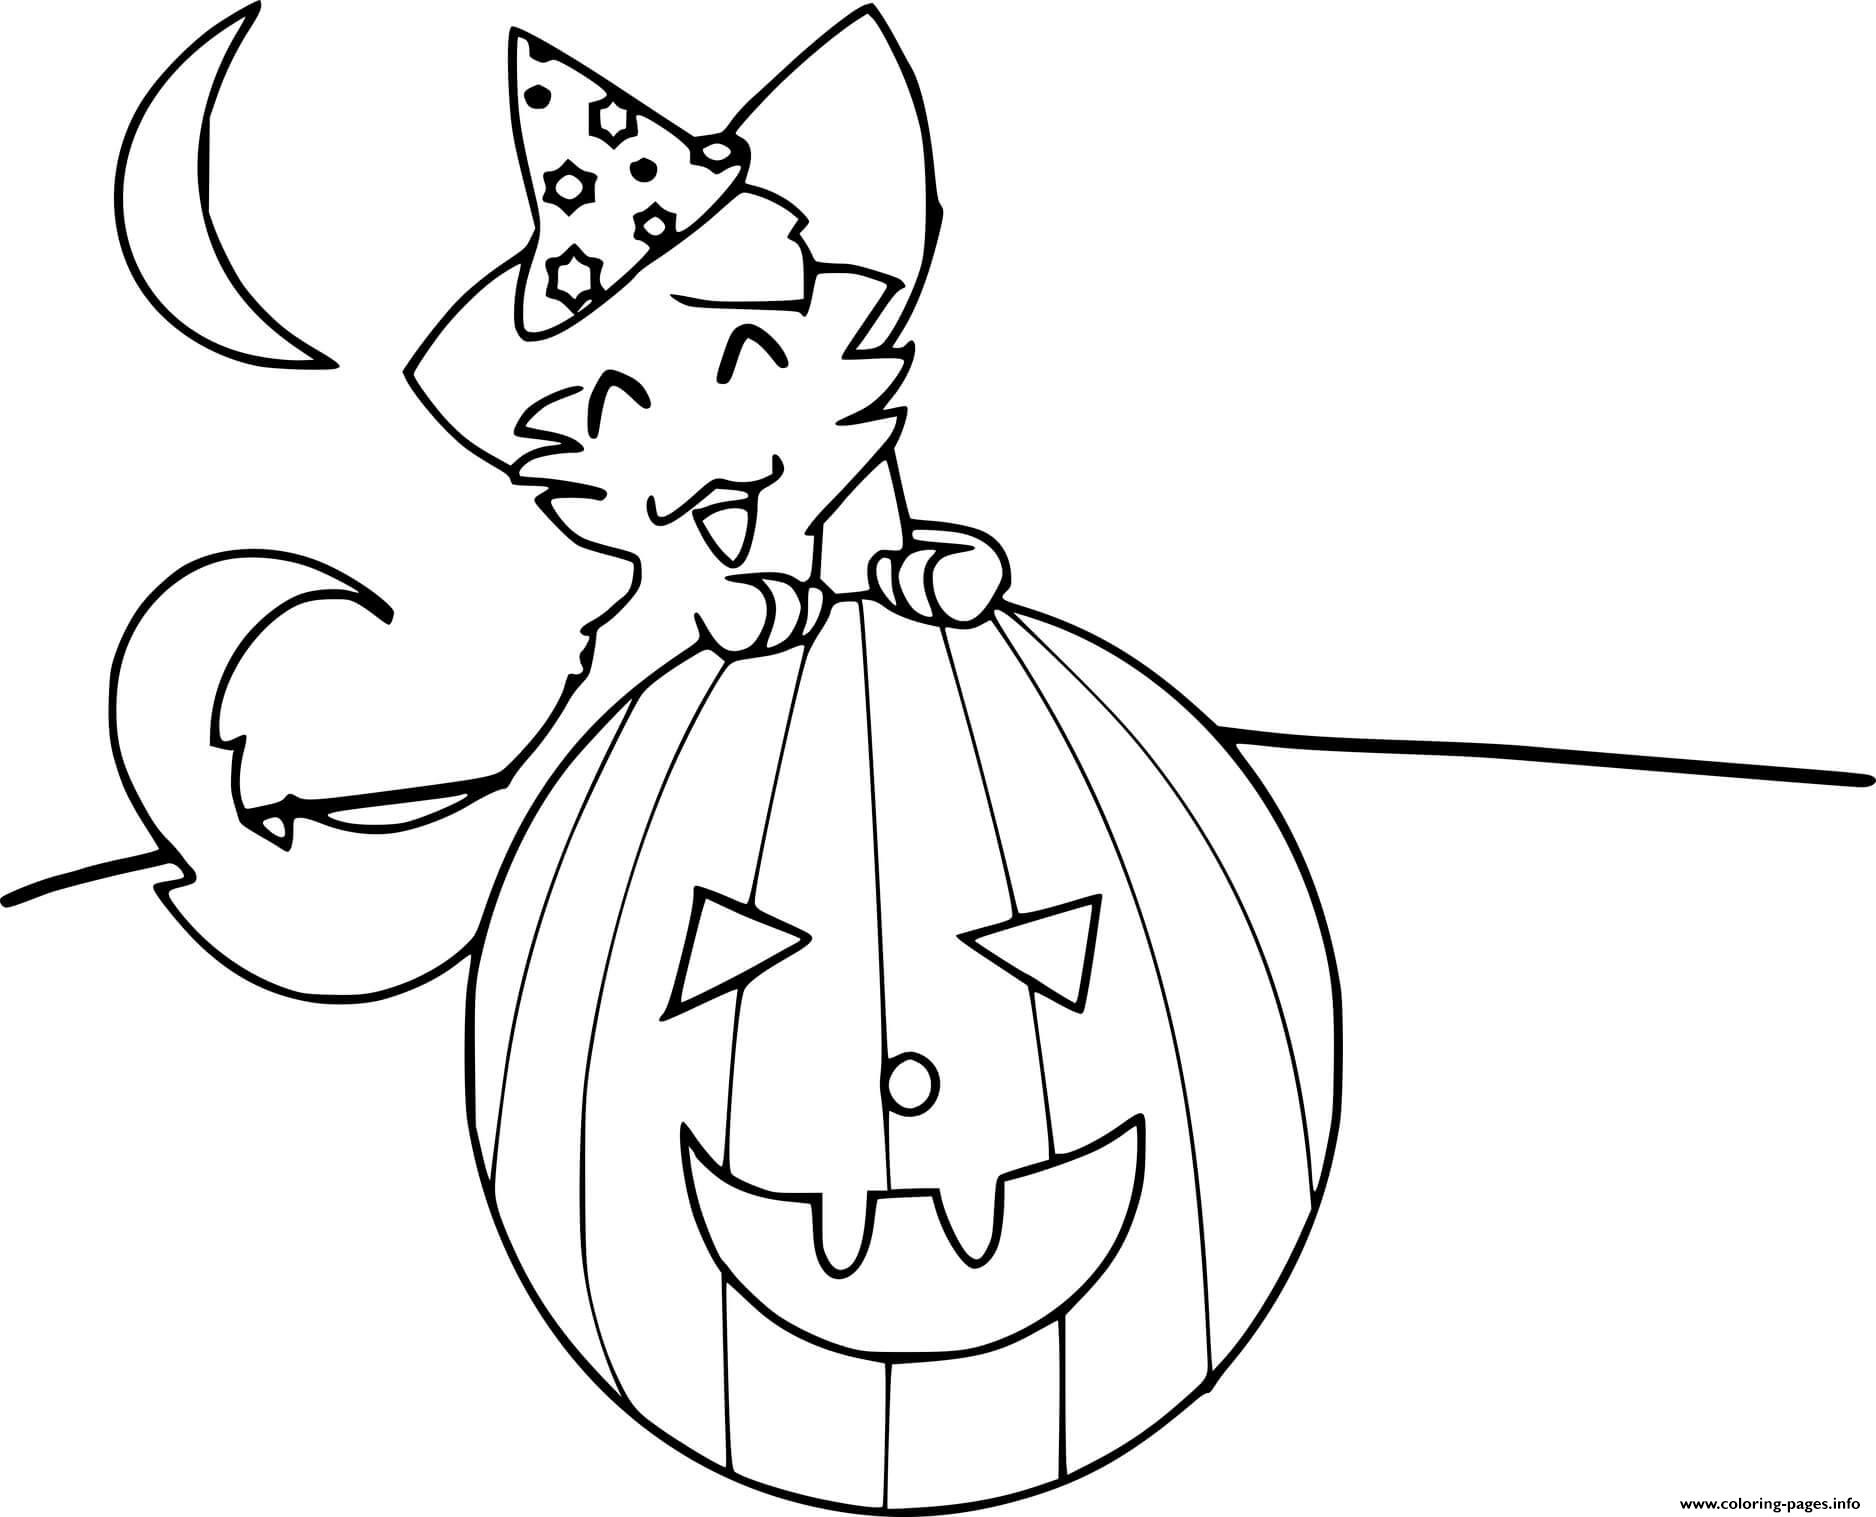 Jack O Lantern With A Cute Cat coloring